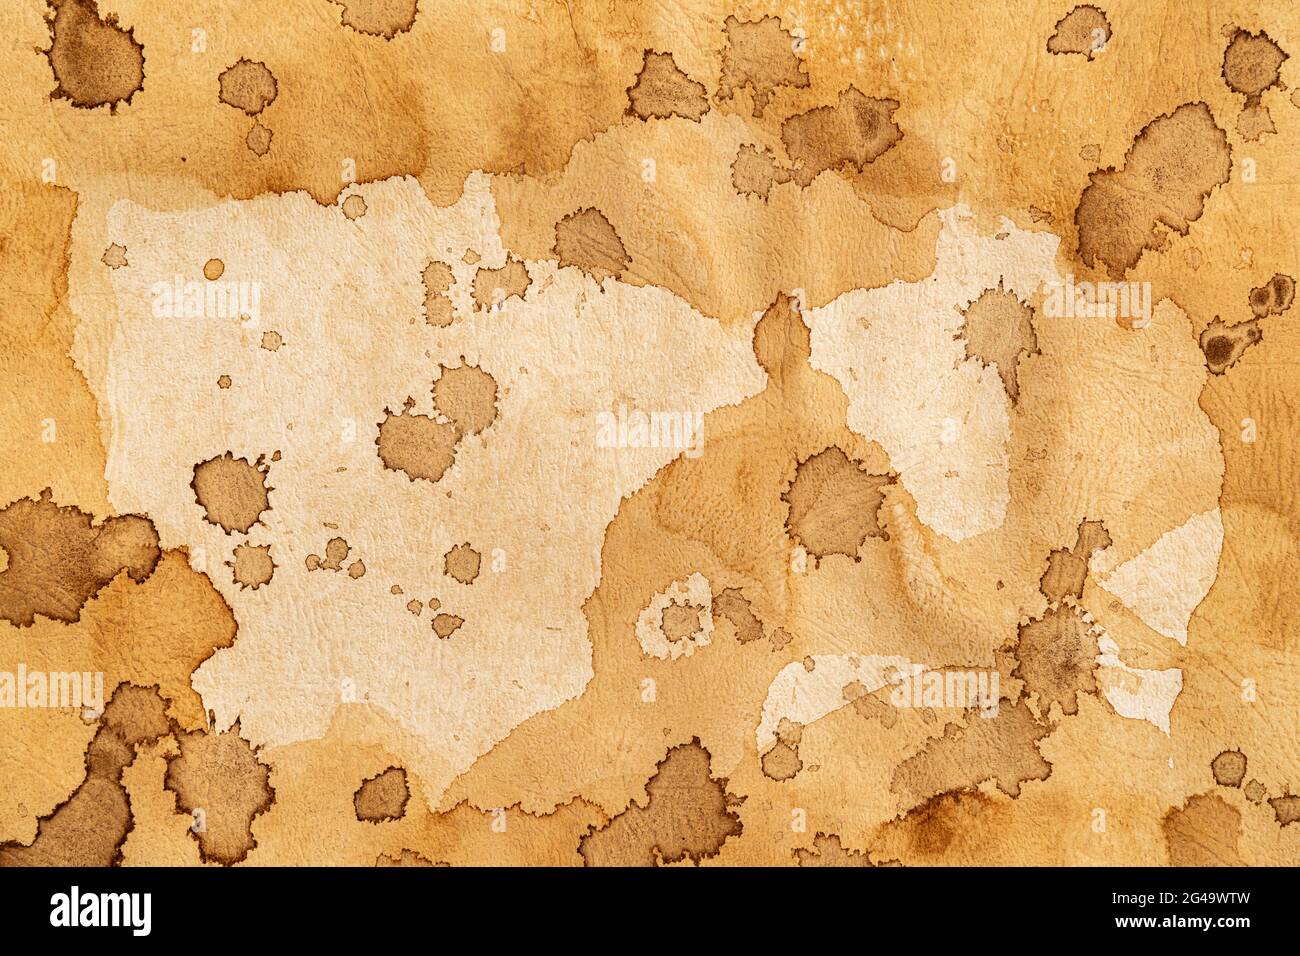 Old paper texture, vintage paper background Stock Photo